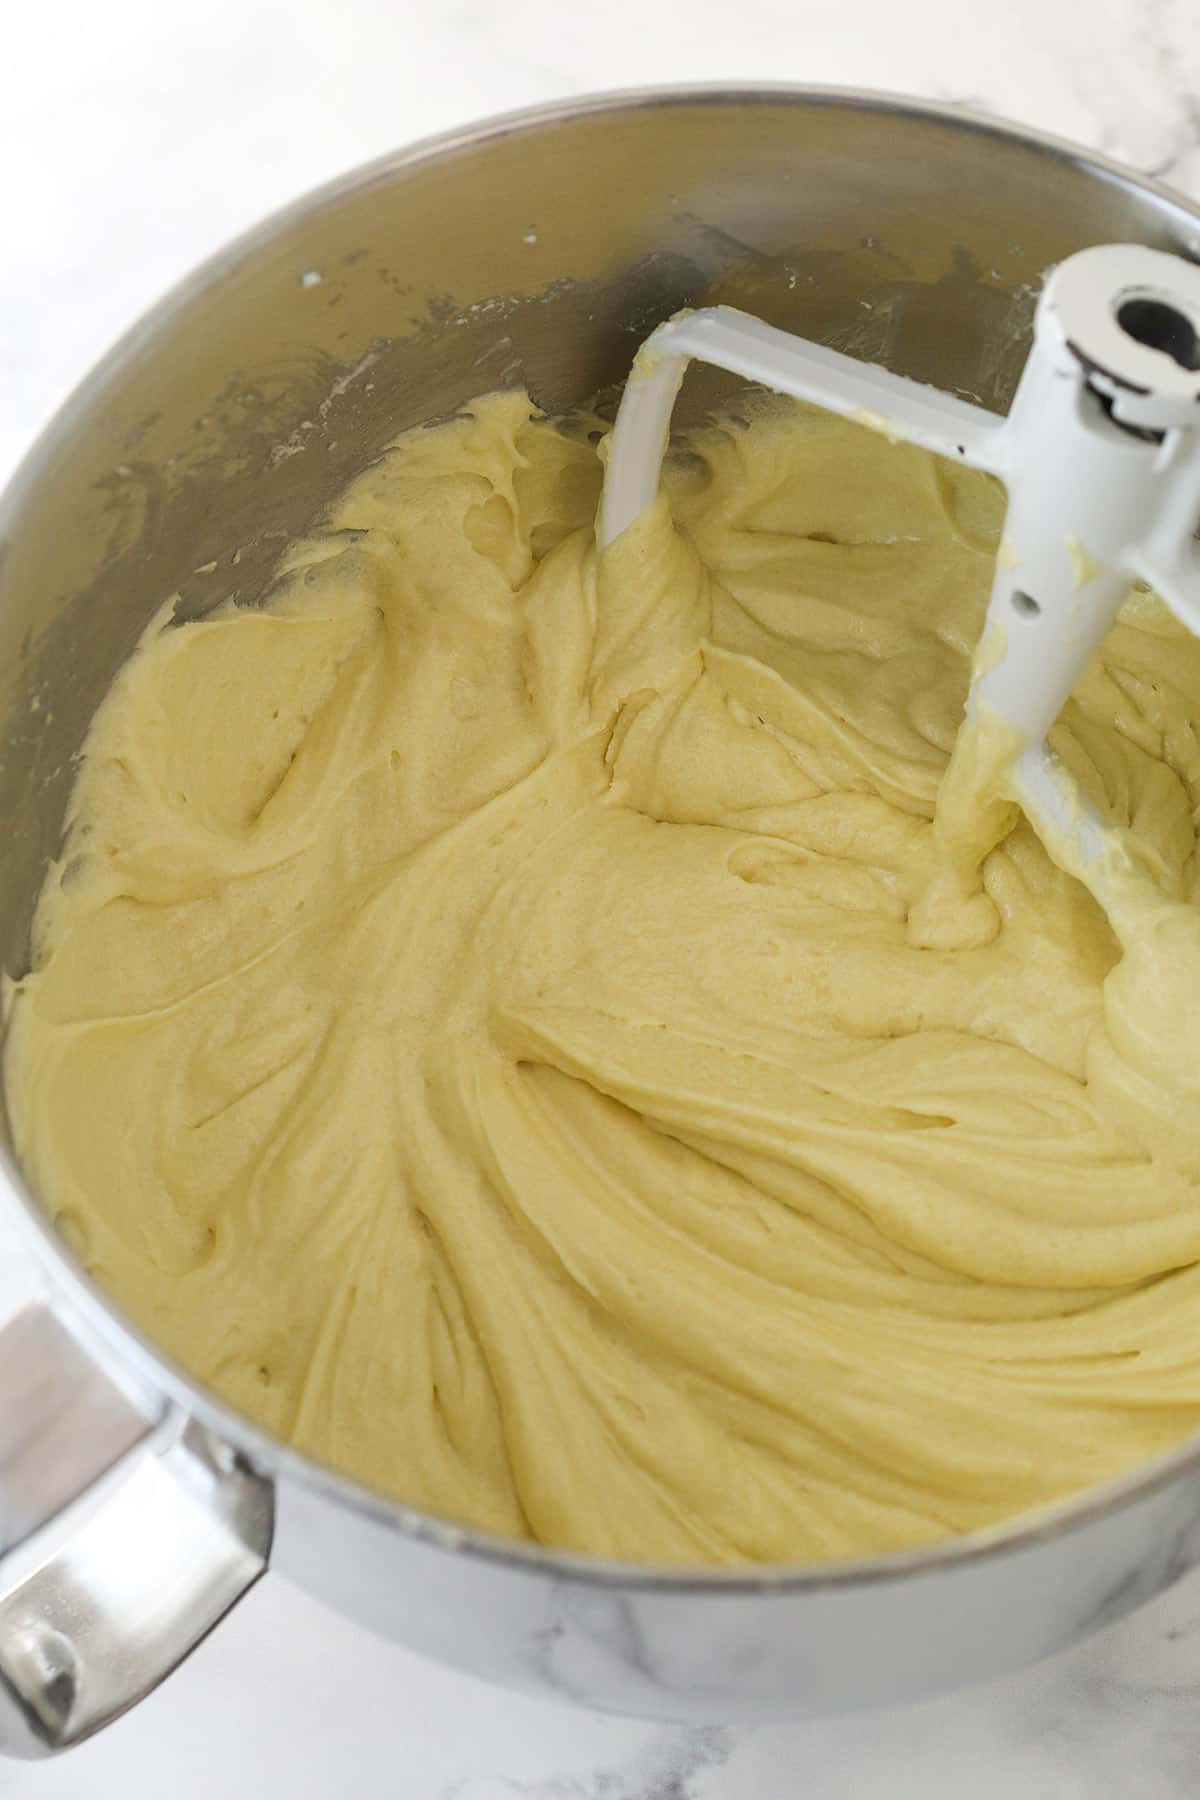 Combining dry and wet ingredients for cake batter.